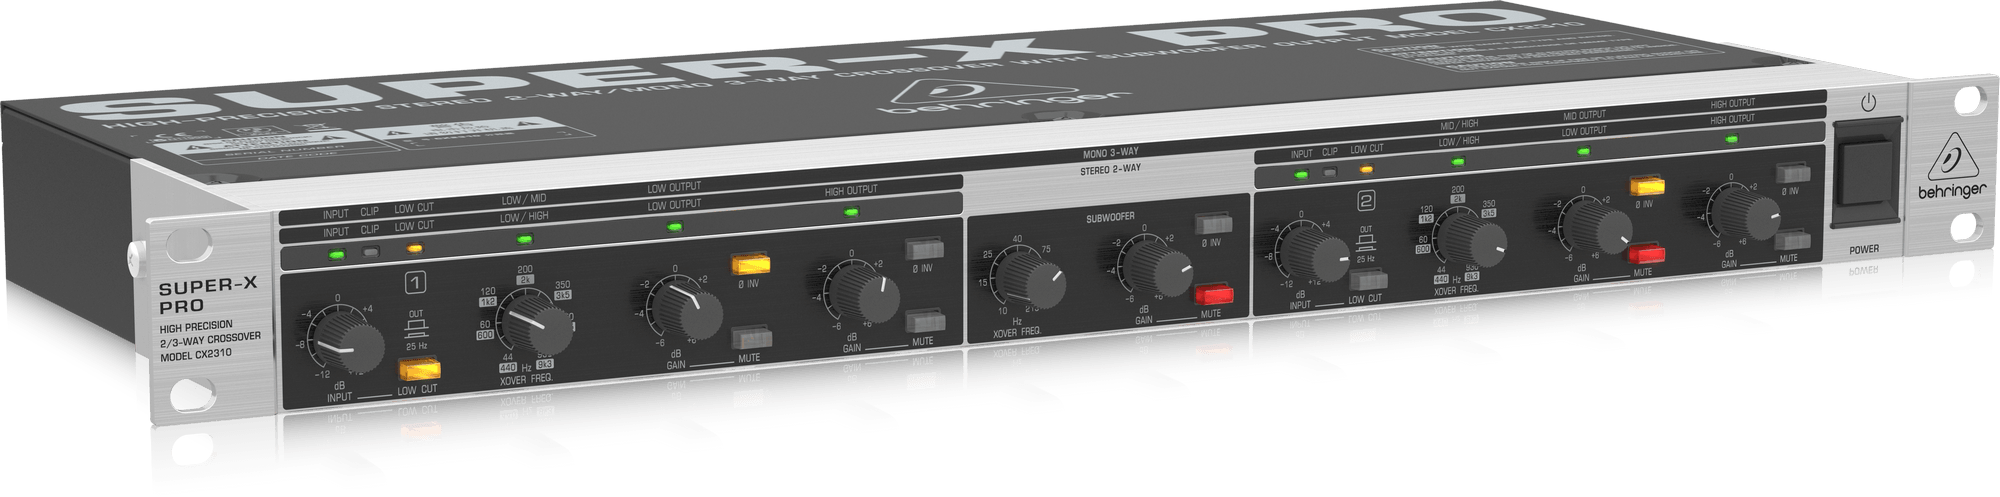 Behringer Super-X Pro CX2310 V2 Stereo 2-way/Mono 3-way Crossover | BEHRINGER , Zoso Music